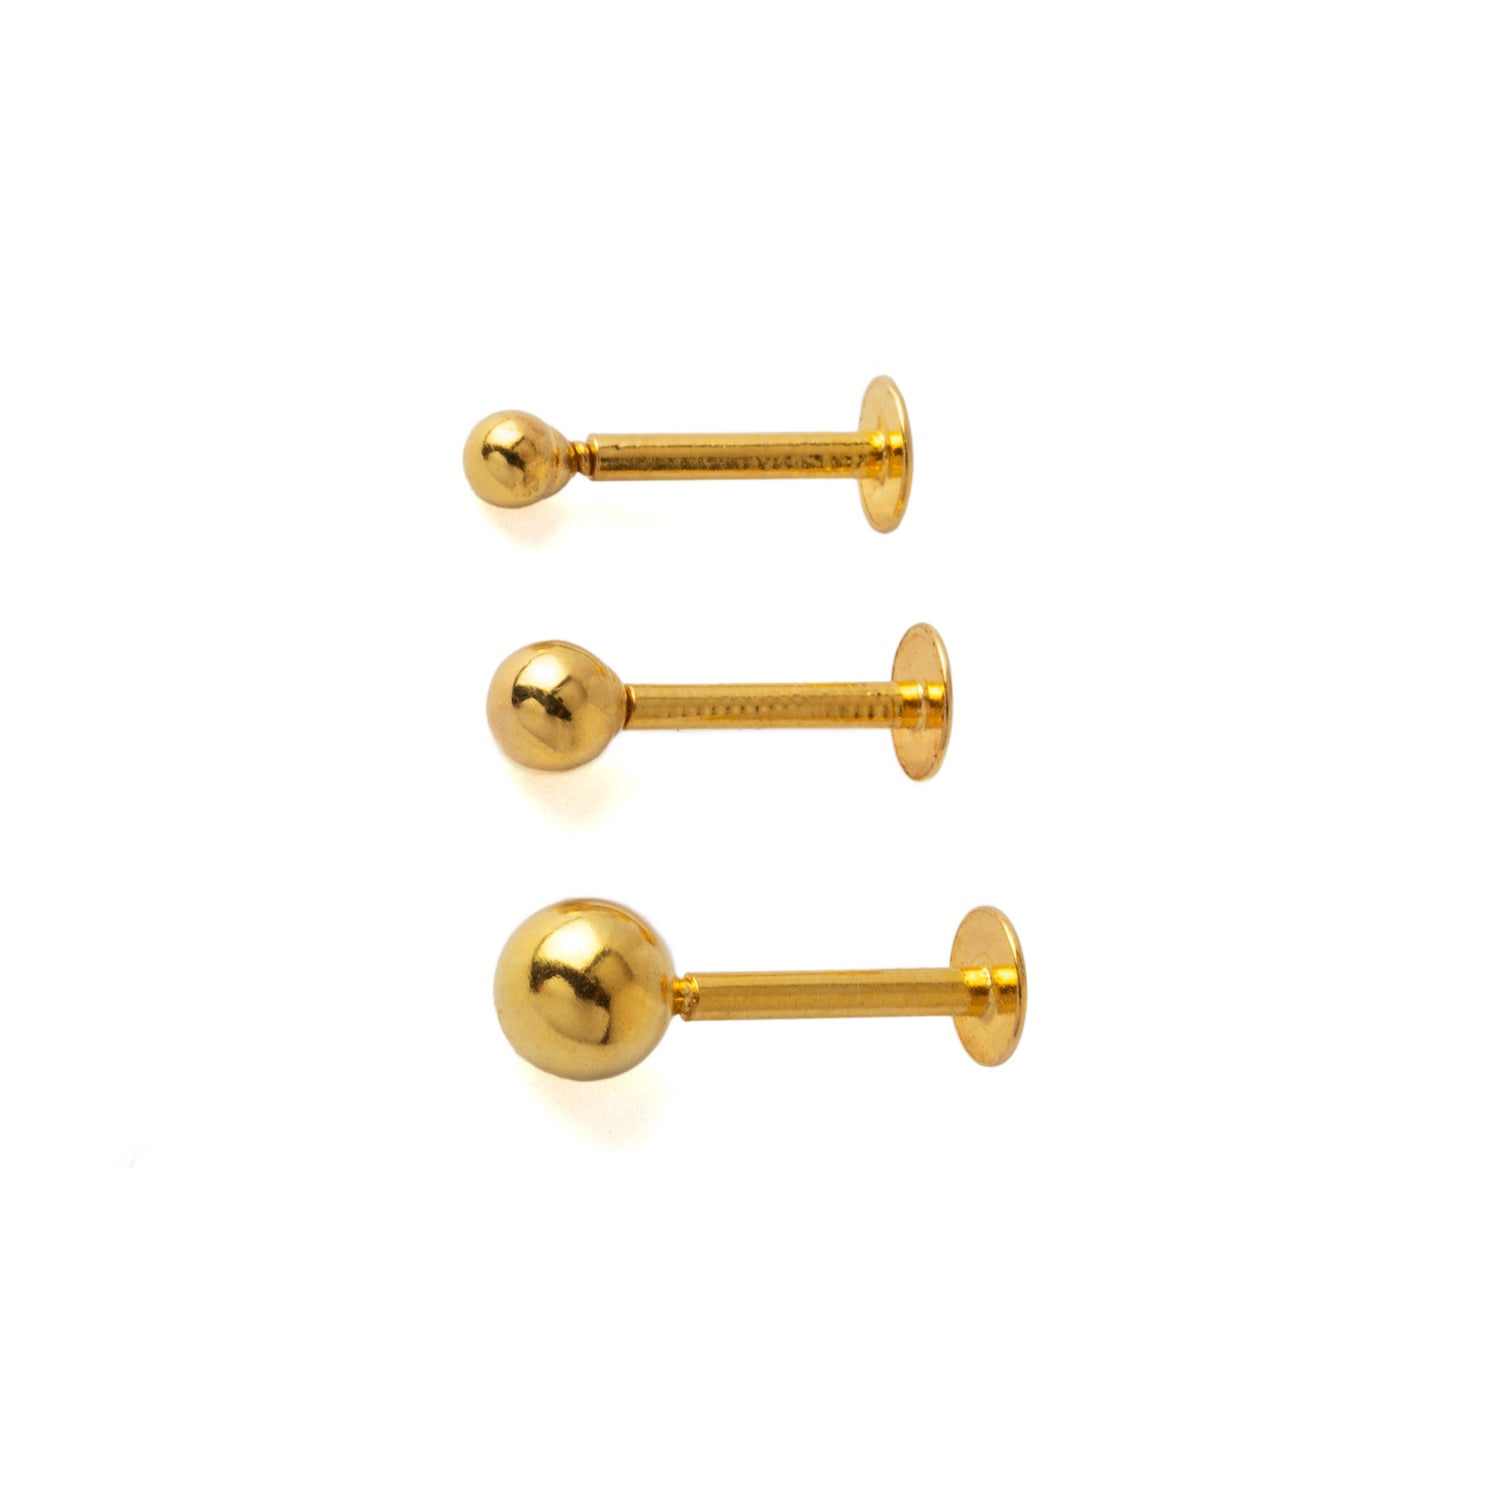 2mm, 3mm and 4mm 18K Gold Dot Flat Back Studs right side view